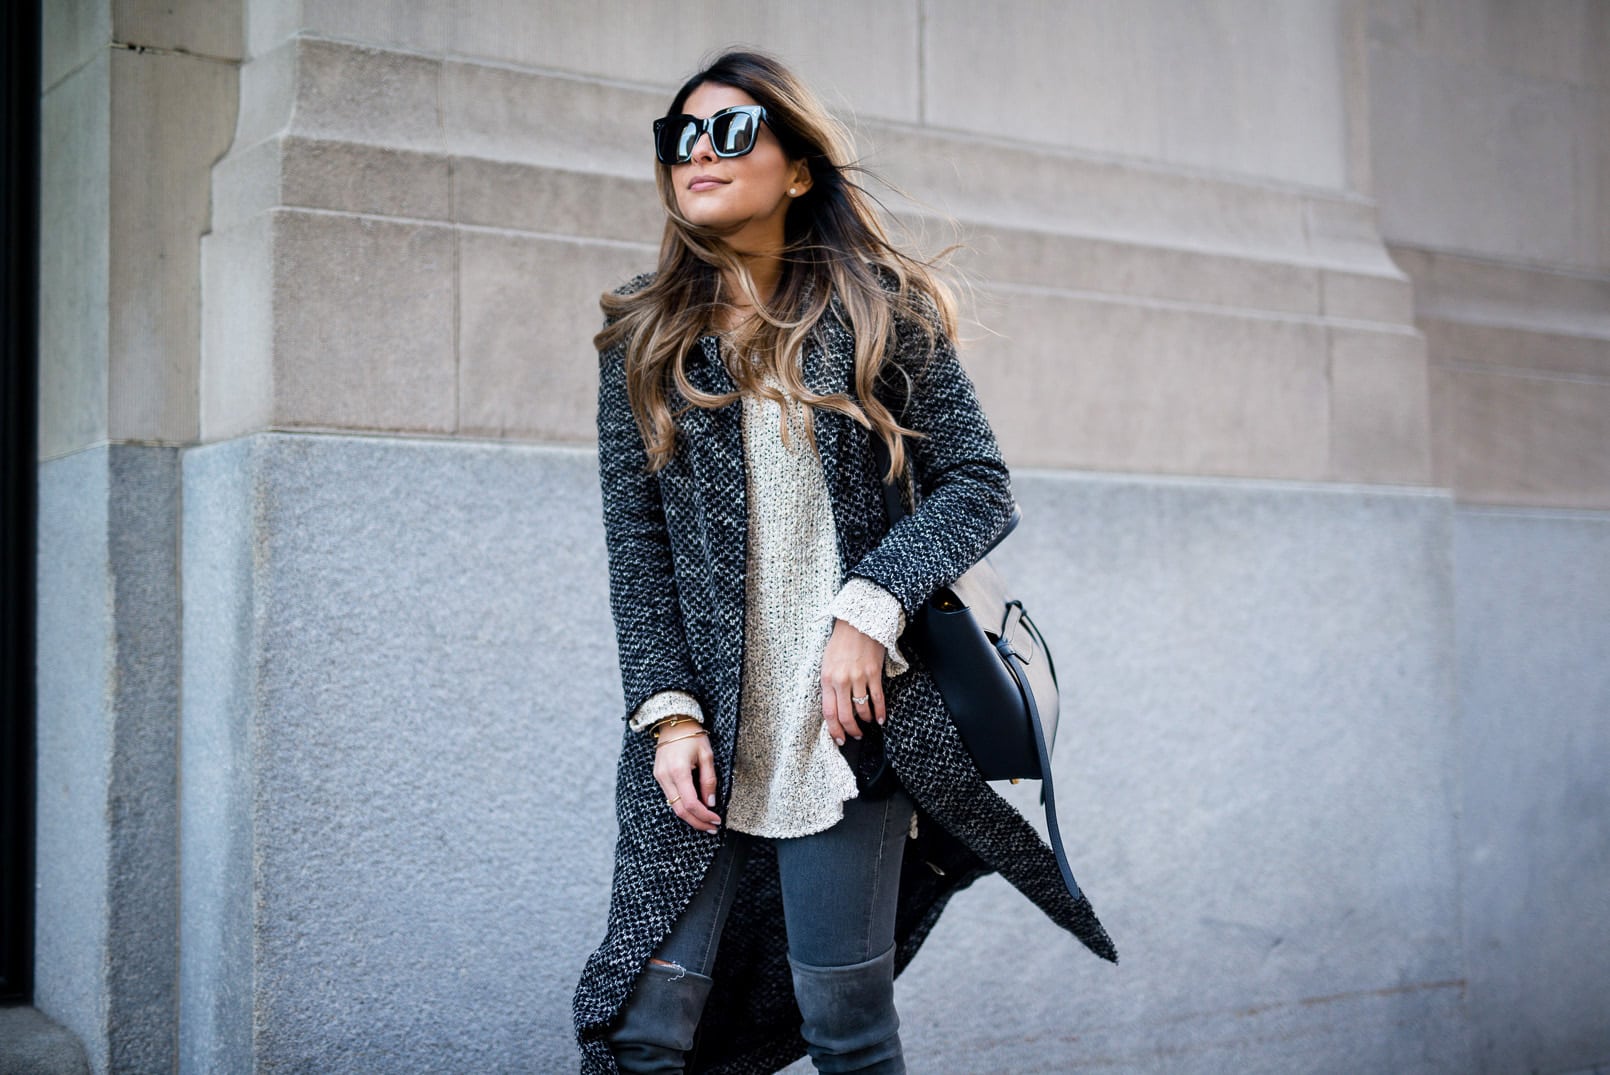 Pam Hetlinger, The Girl From Panama wearing a willow and clay tweed cardigan, stuart weitzman highland over the knee boots, topshop grey jeans, h&m grey sweater, celine belt bag, and celine sunglasses.